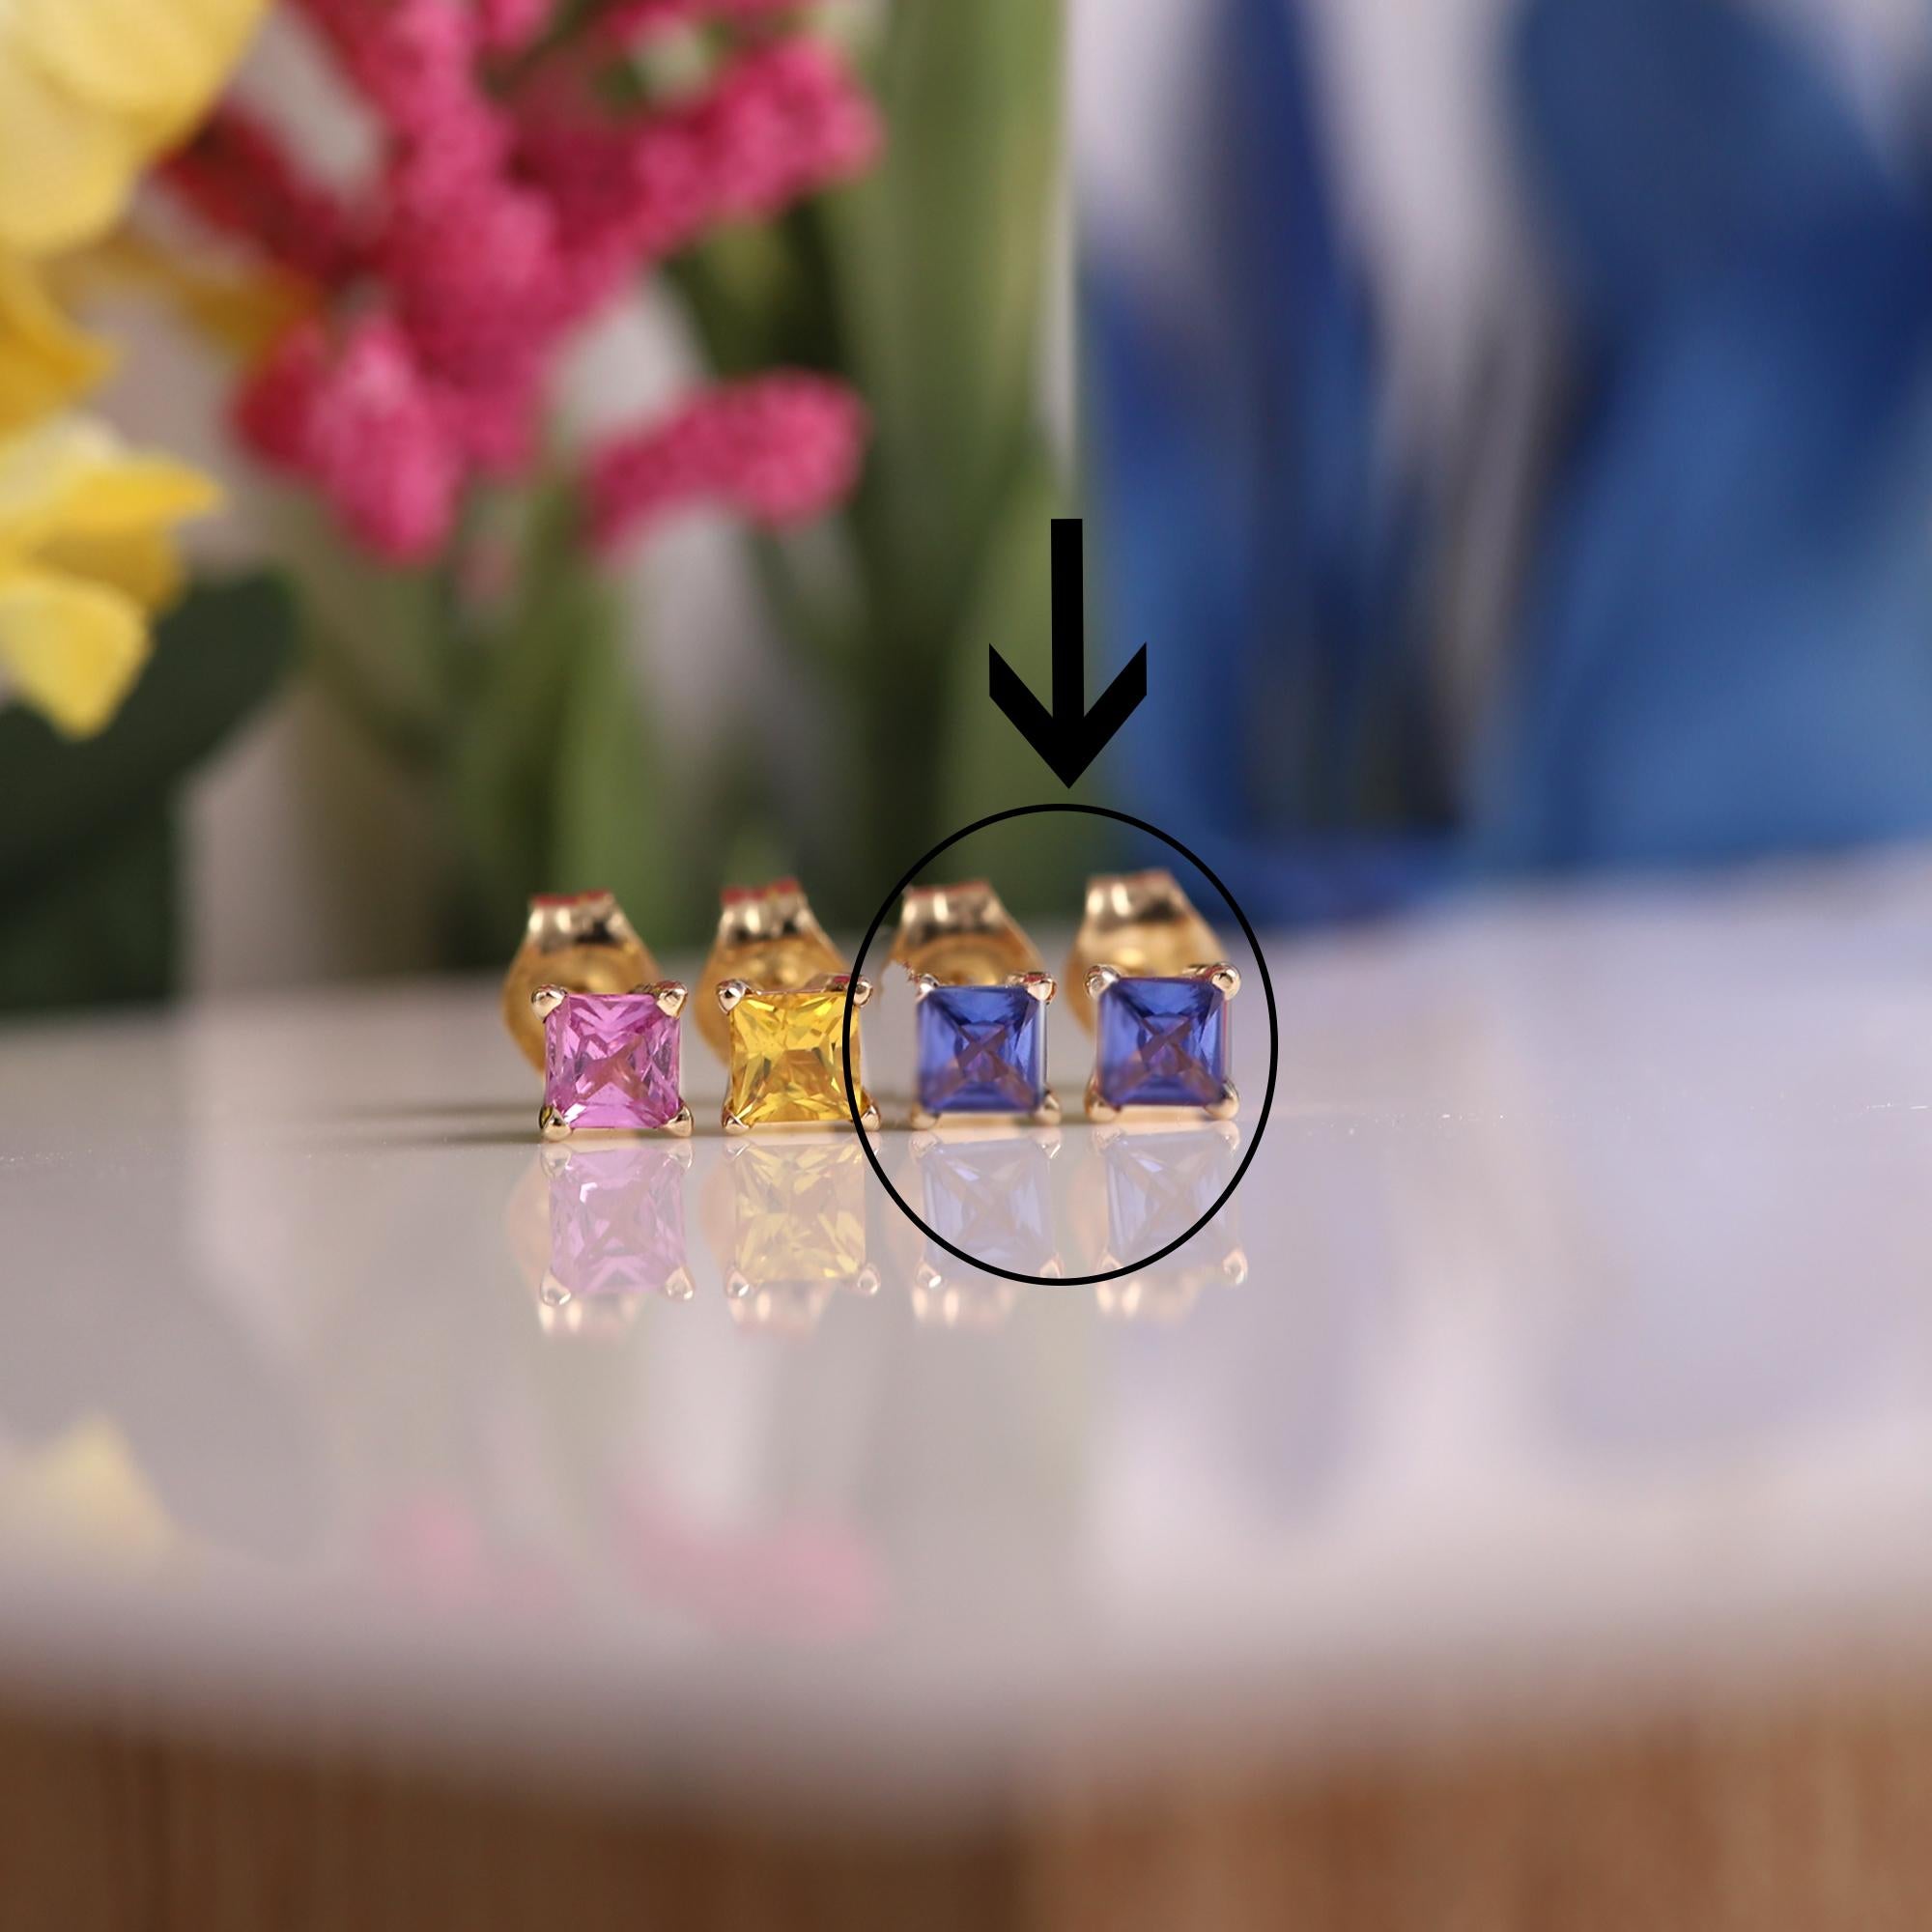 Solid 14k Yellow Gold 
Natural Blue Sapphire Gemstone
1 pair ( 2pieces )
each stone is 3.0 mm approx 0.20 carat 
Square shape
AA Quality Gems
due to natural formations minor inclusions or imperfections may occur
Good for any age
+Gift Box
